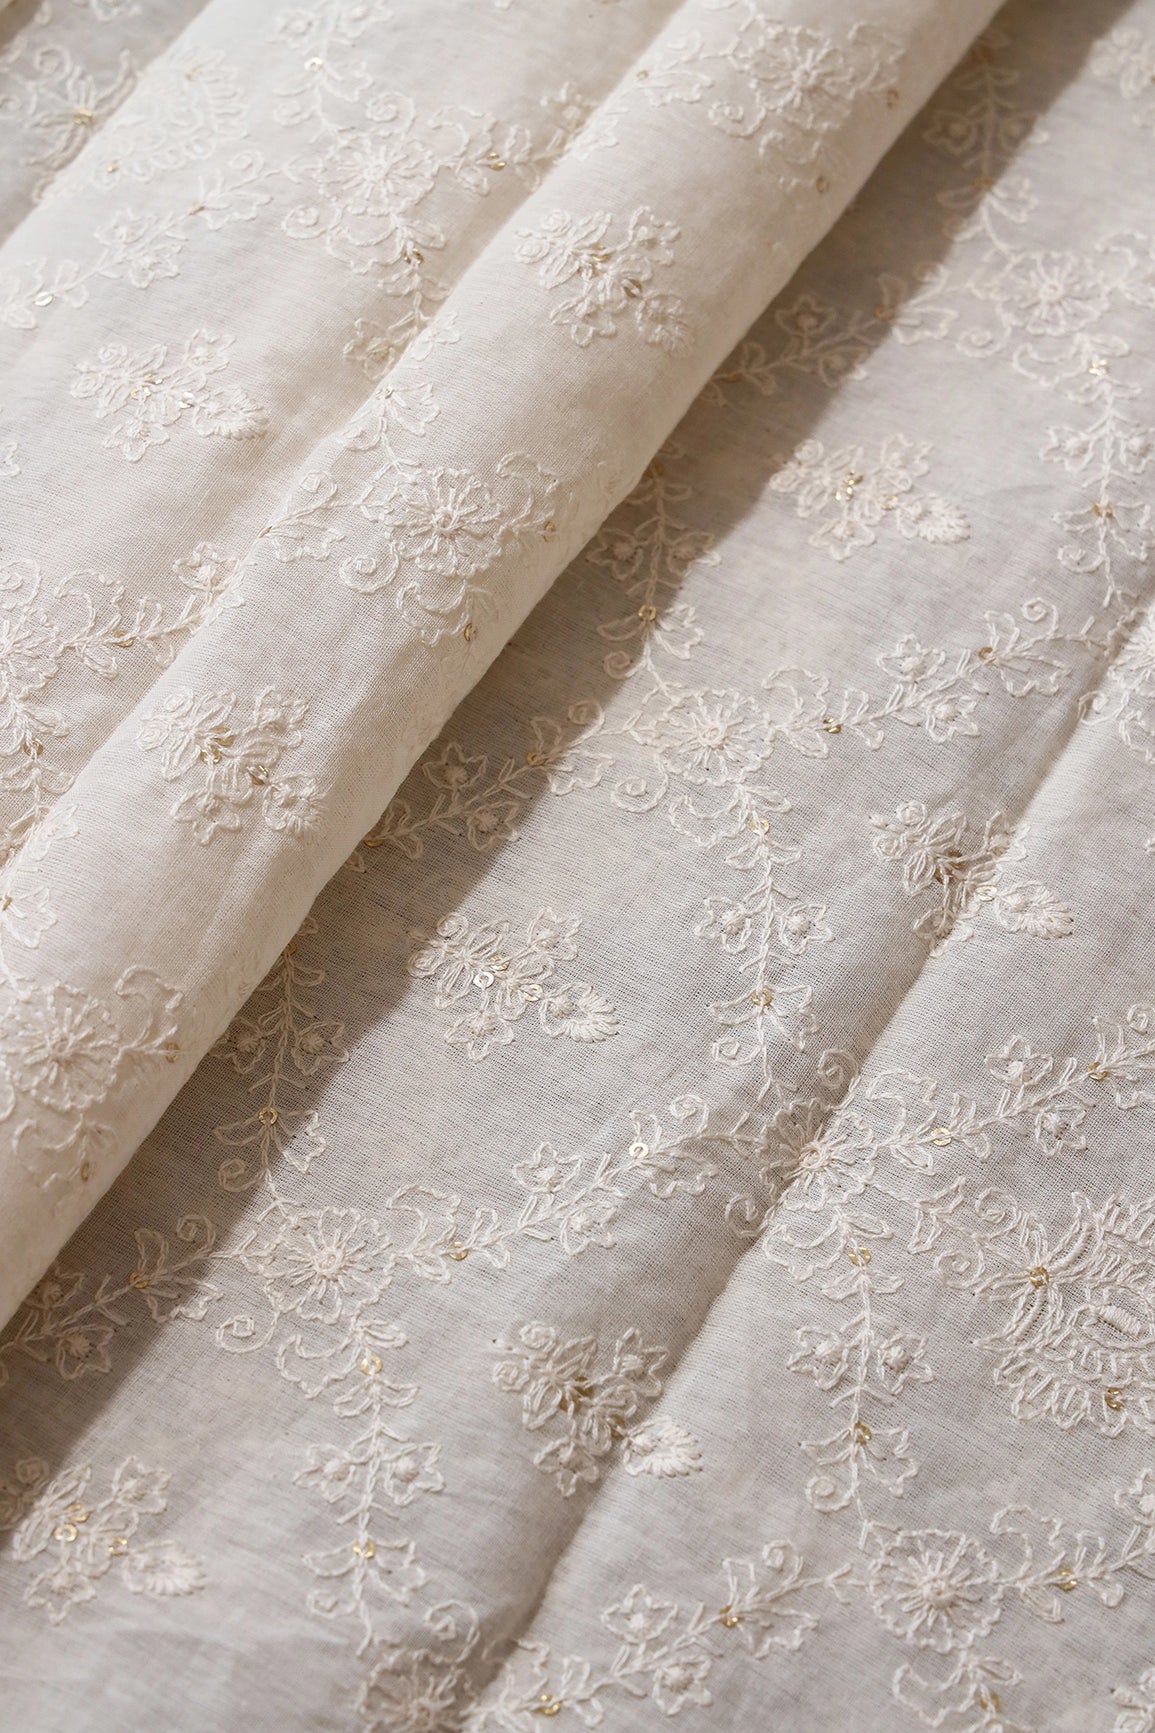 2 Meter Cut Piece Of Beautiful White Thread With Gold Sequins Floral Embroidery On Off White Cotton Fabric